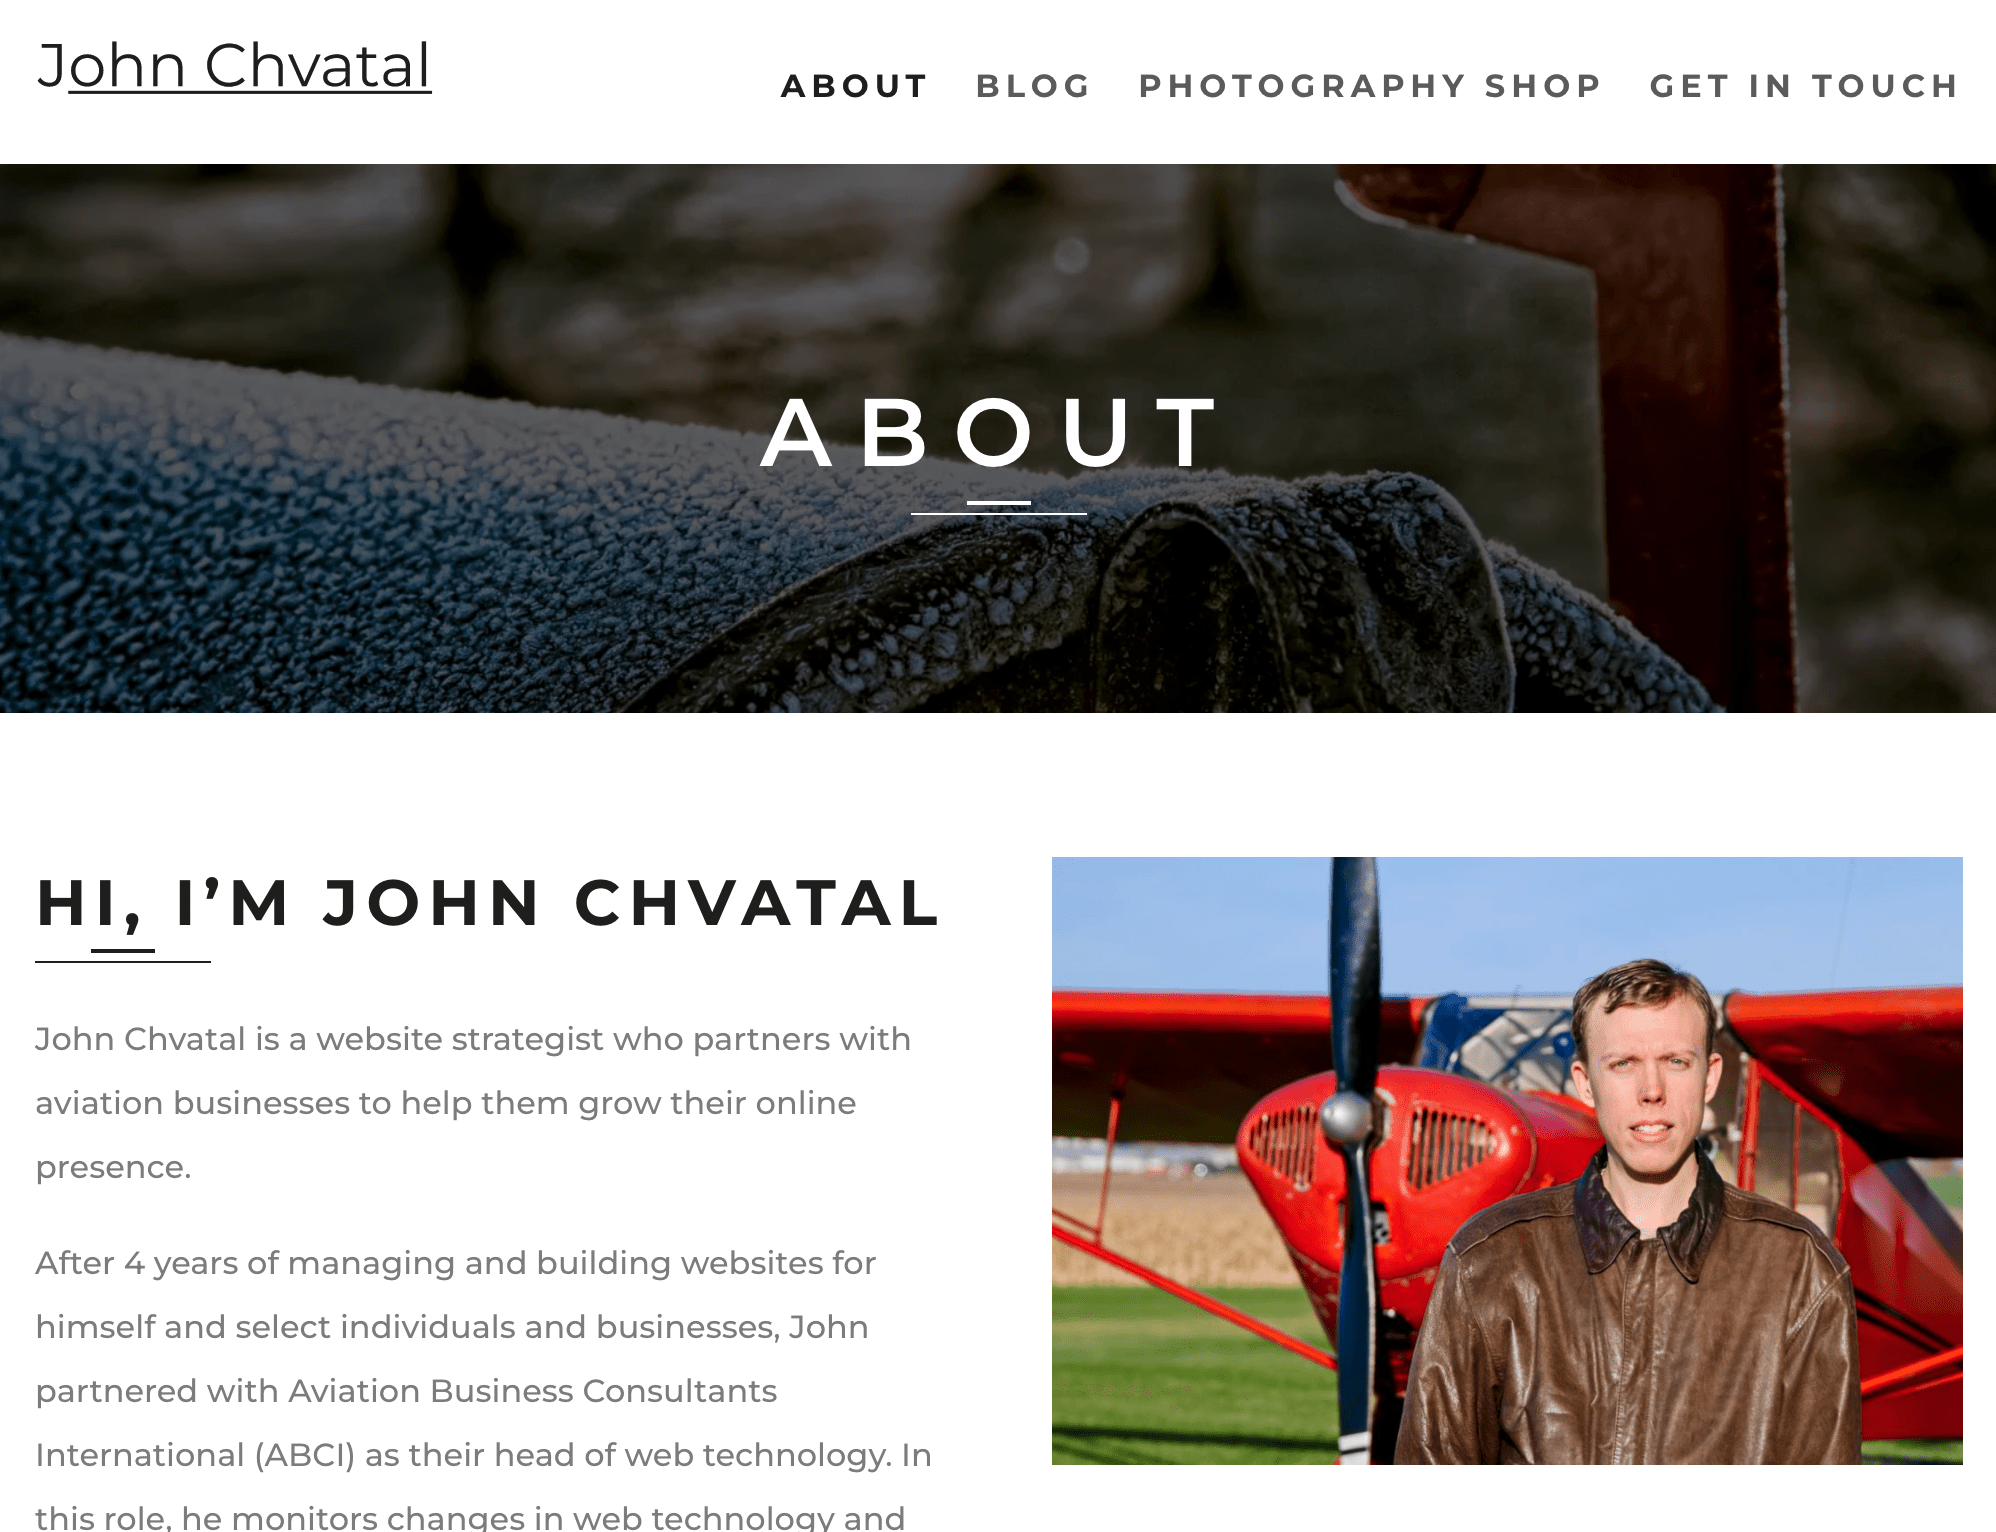 About John Chvatal